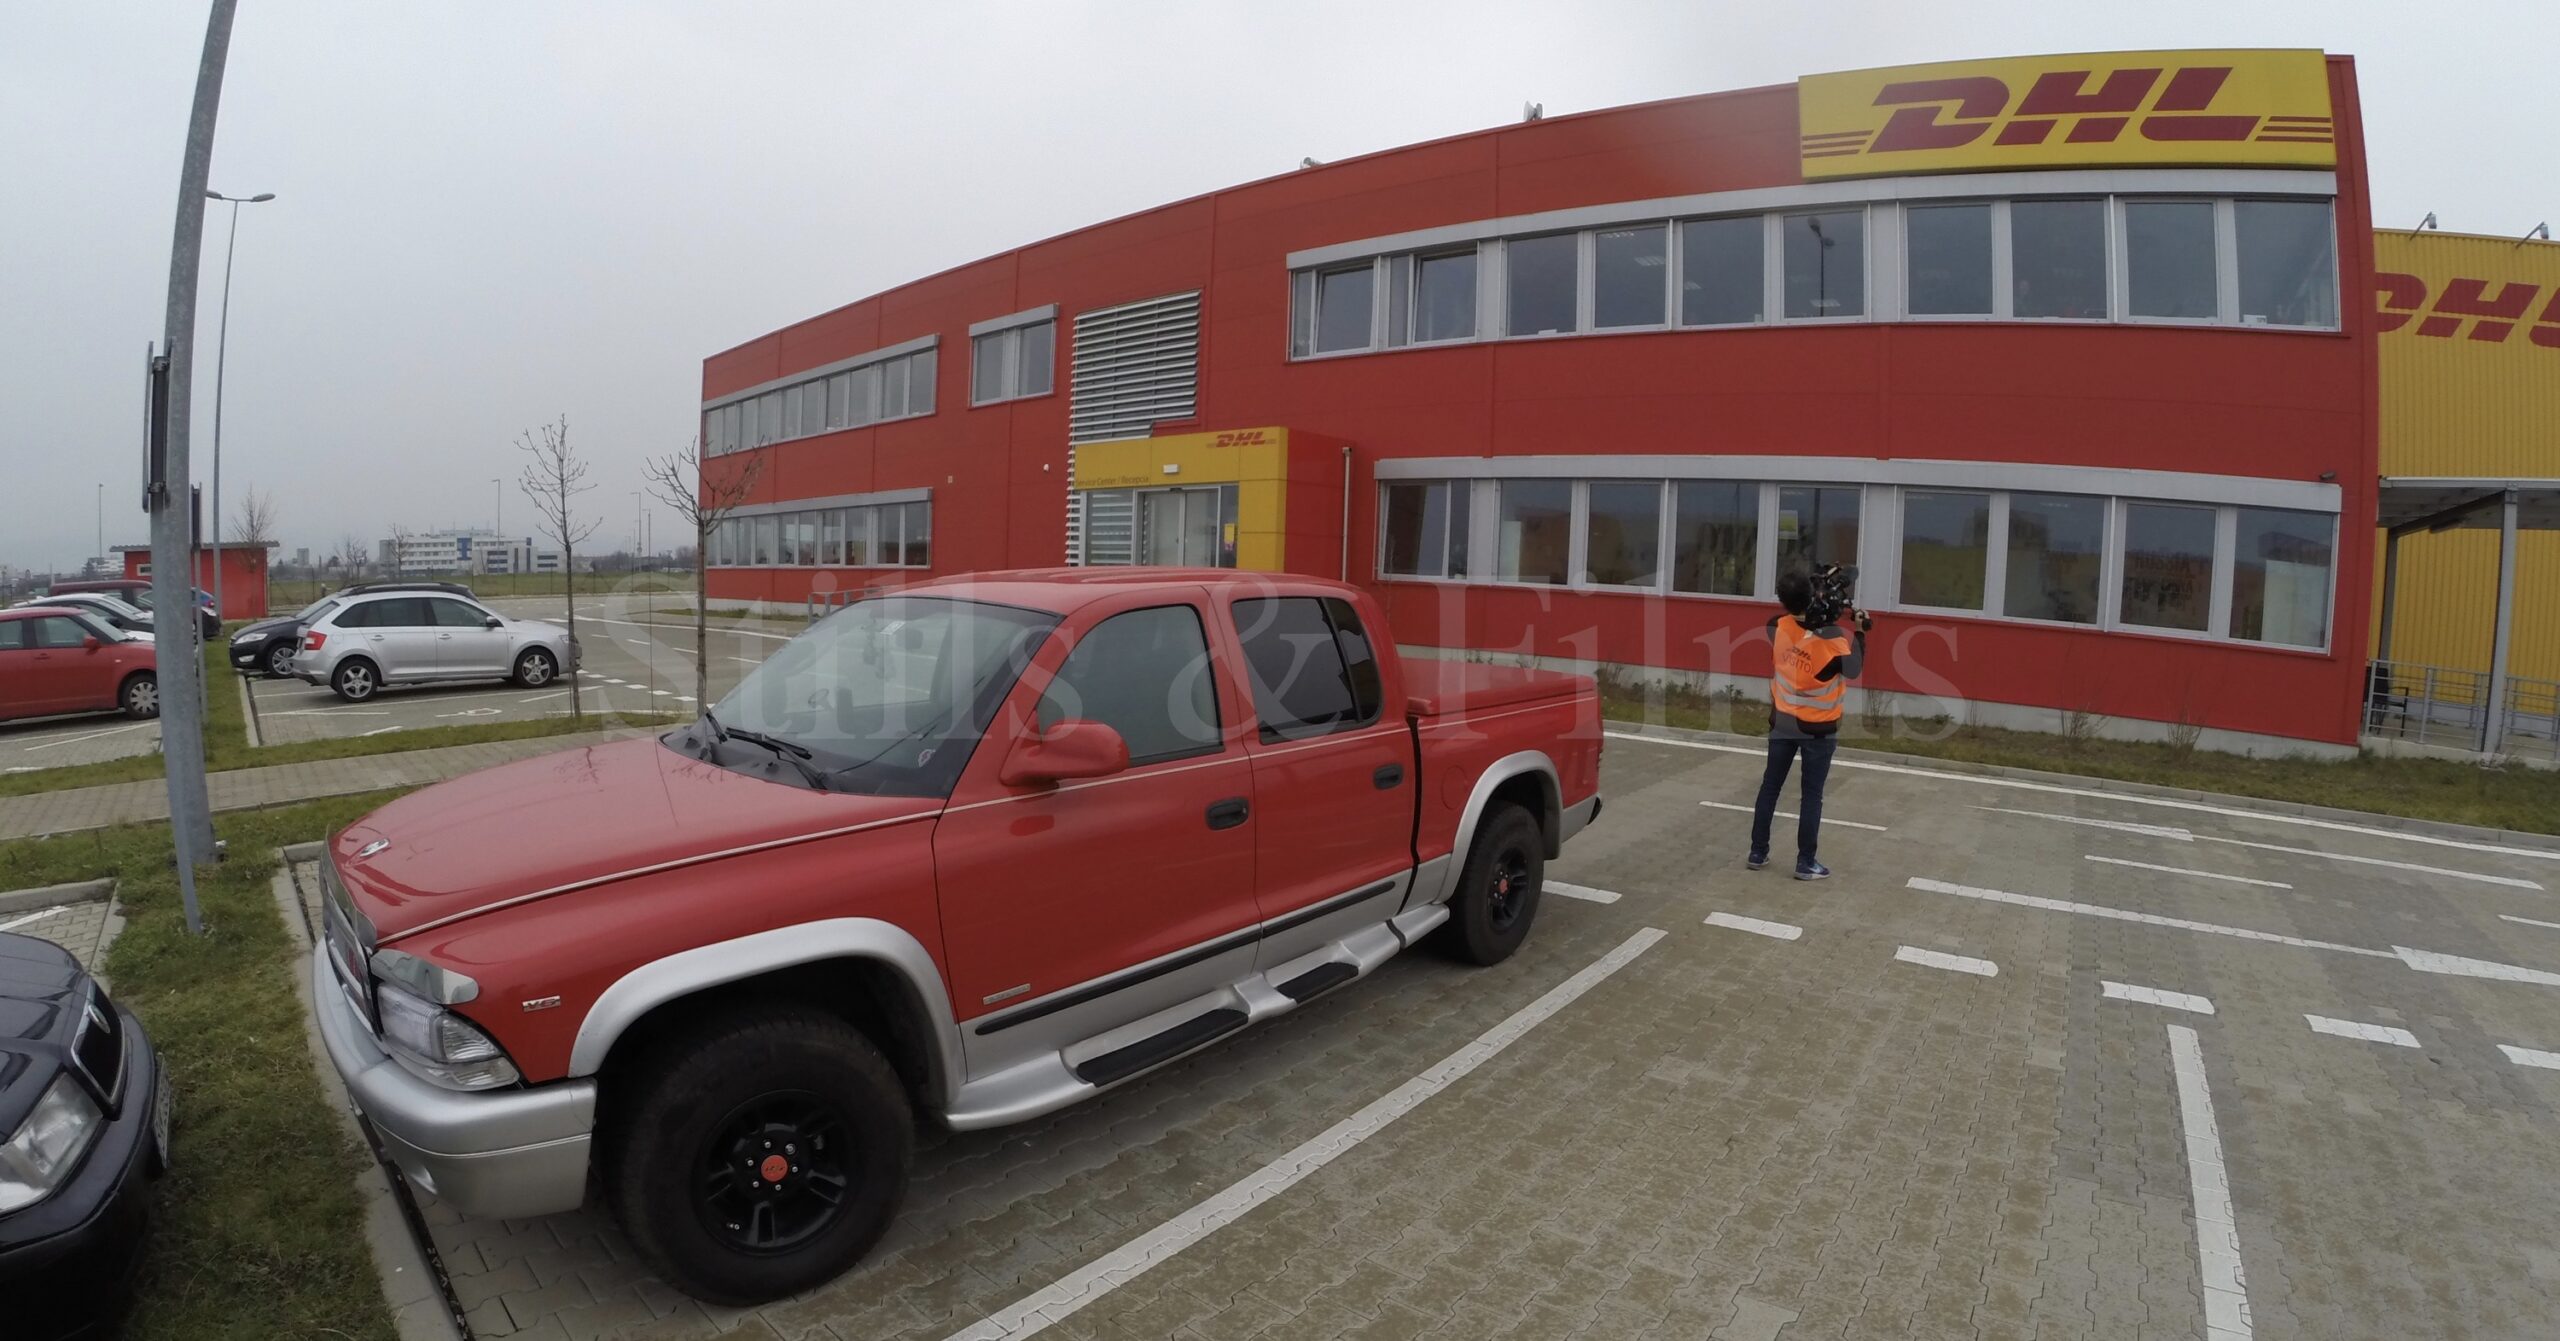 Our lil' red truck nicely blends in with our client's colour.